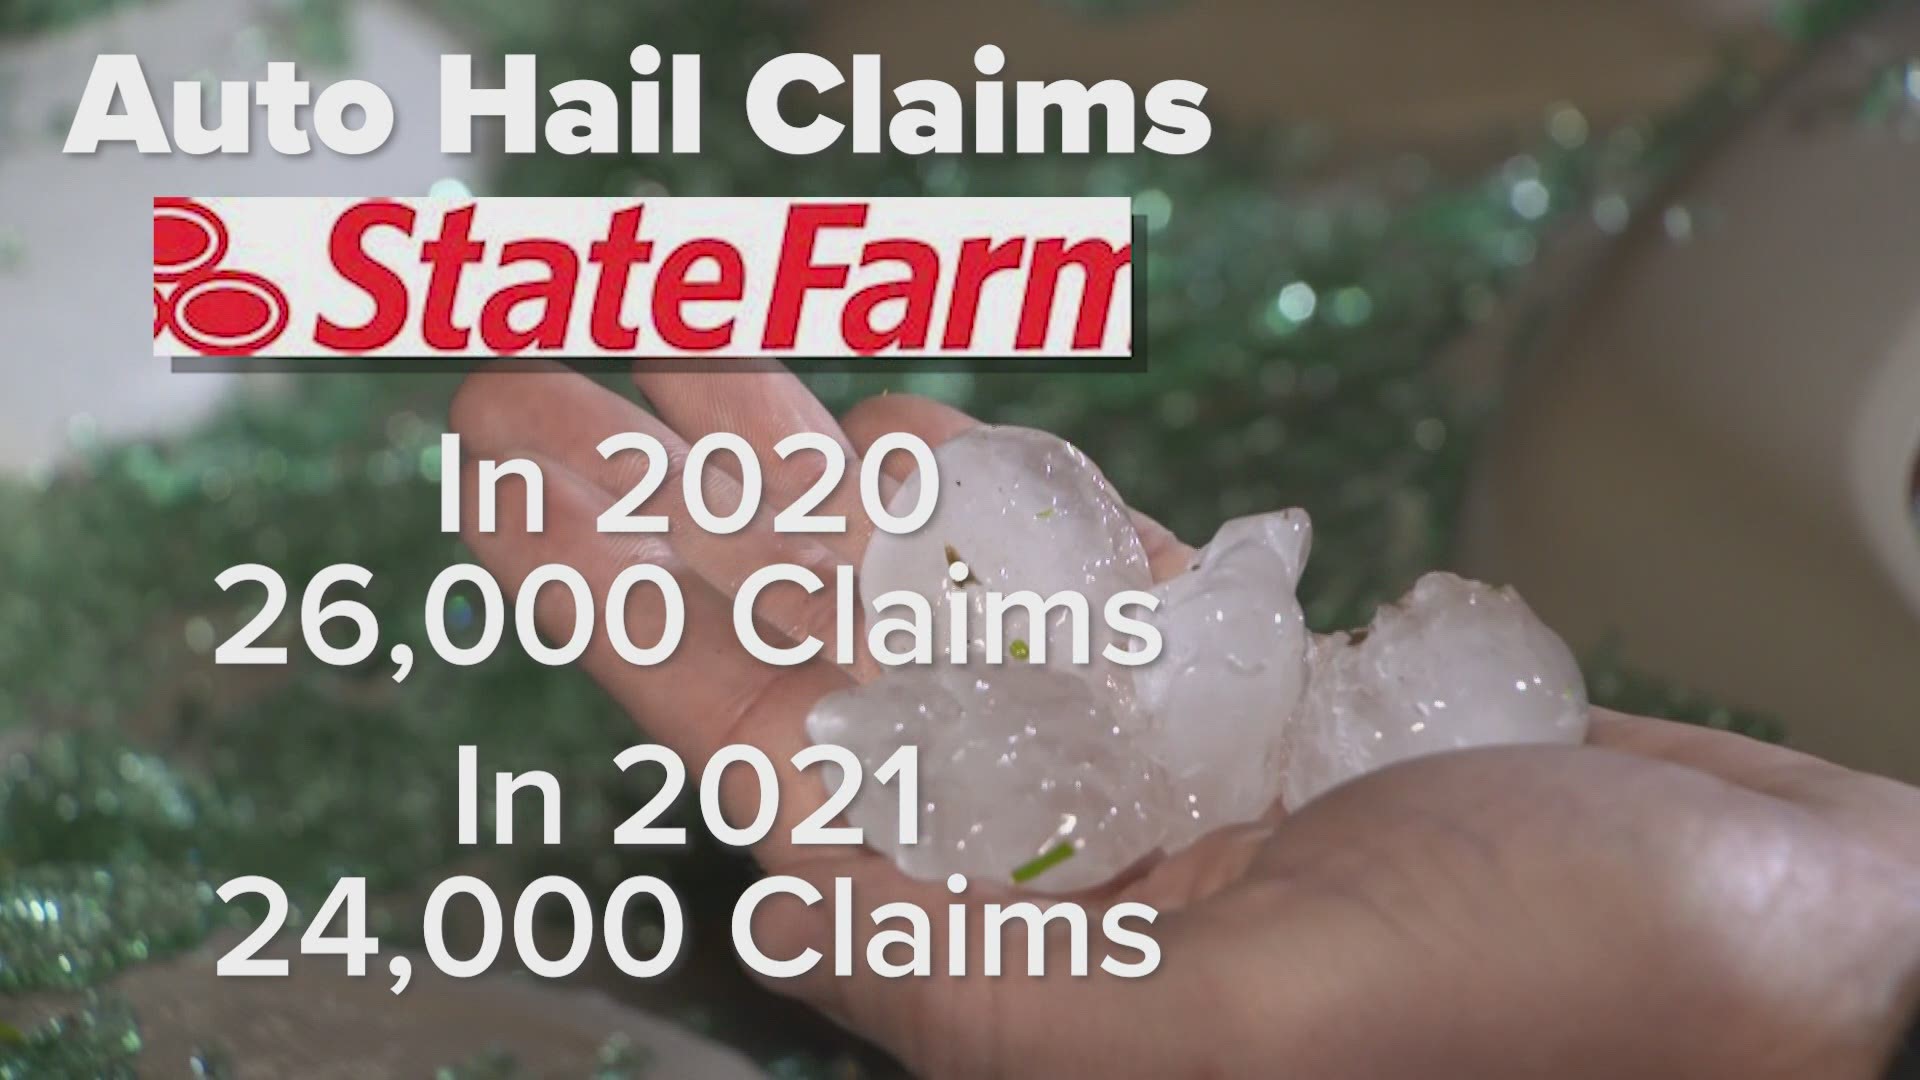 State Farm has gone virtual with many hail damage inspections for automobiles. They just need your phone and a little bit of your pocket change to make it work.